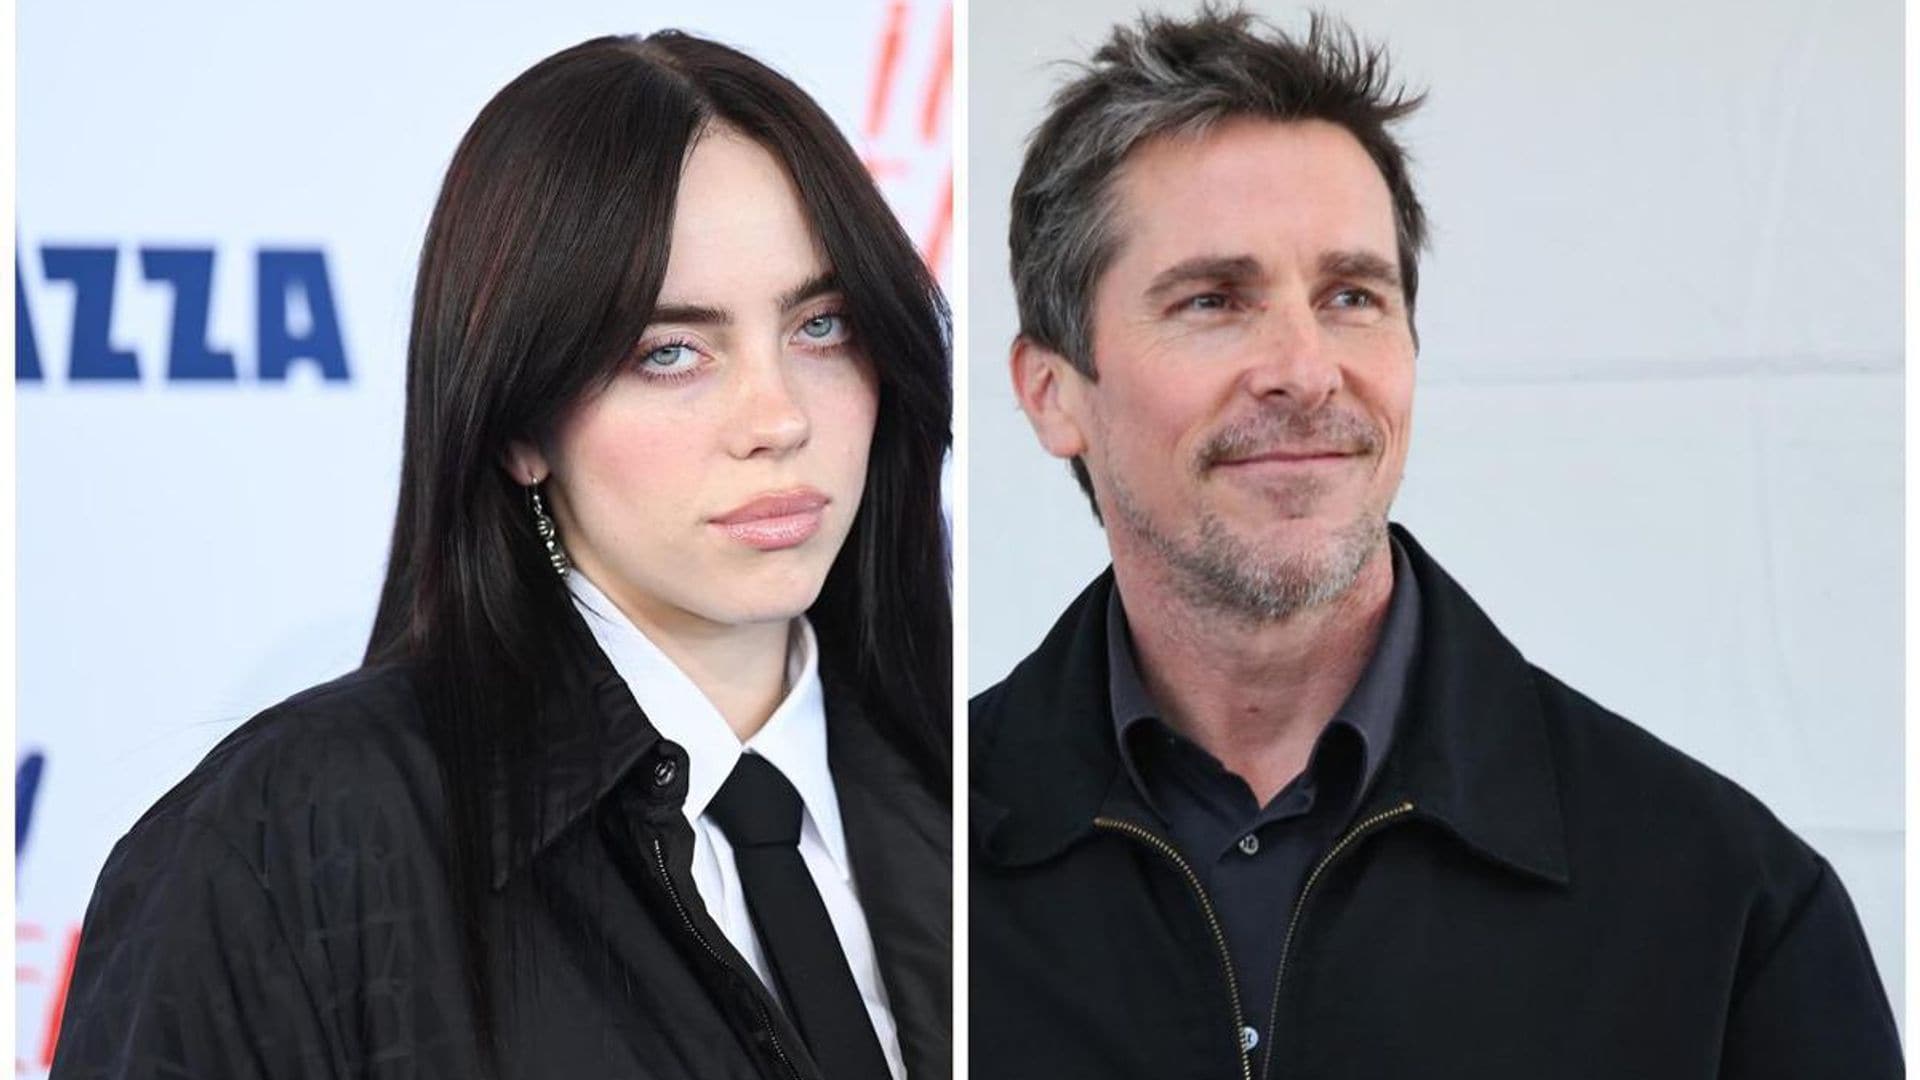 Billie Eilish broke up with her boyfriend after having a romantic dream with Christian Bale